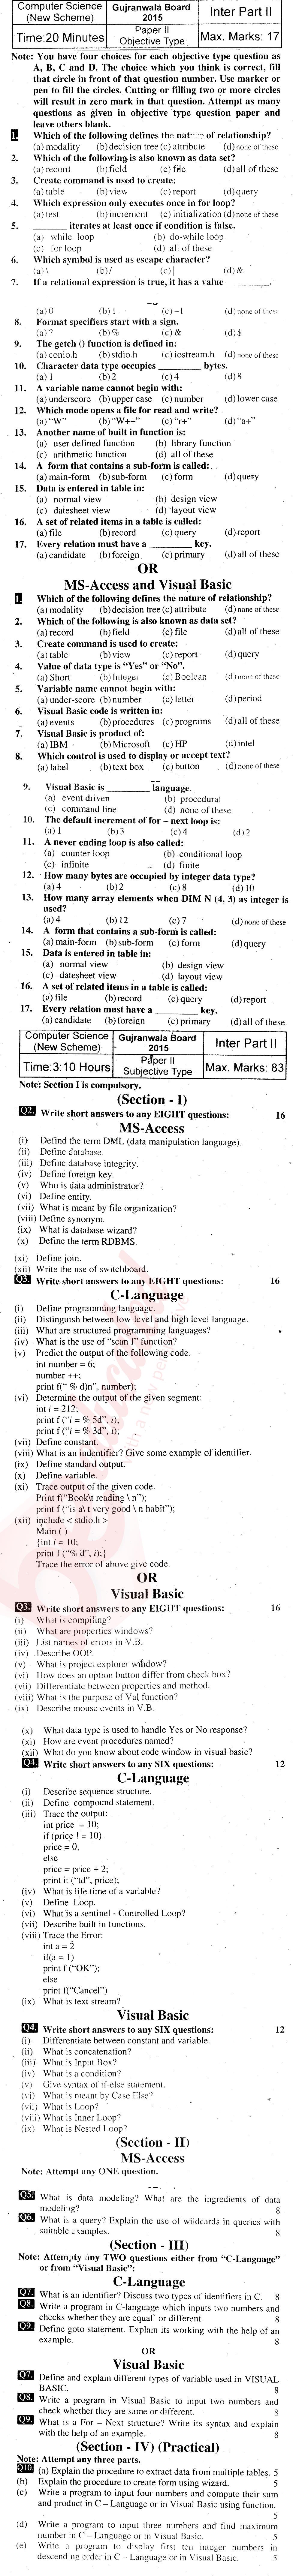 Computer Science ICS Part 2 Past Paper Group 1 BISE Gujranwala 2015